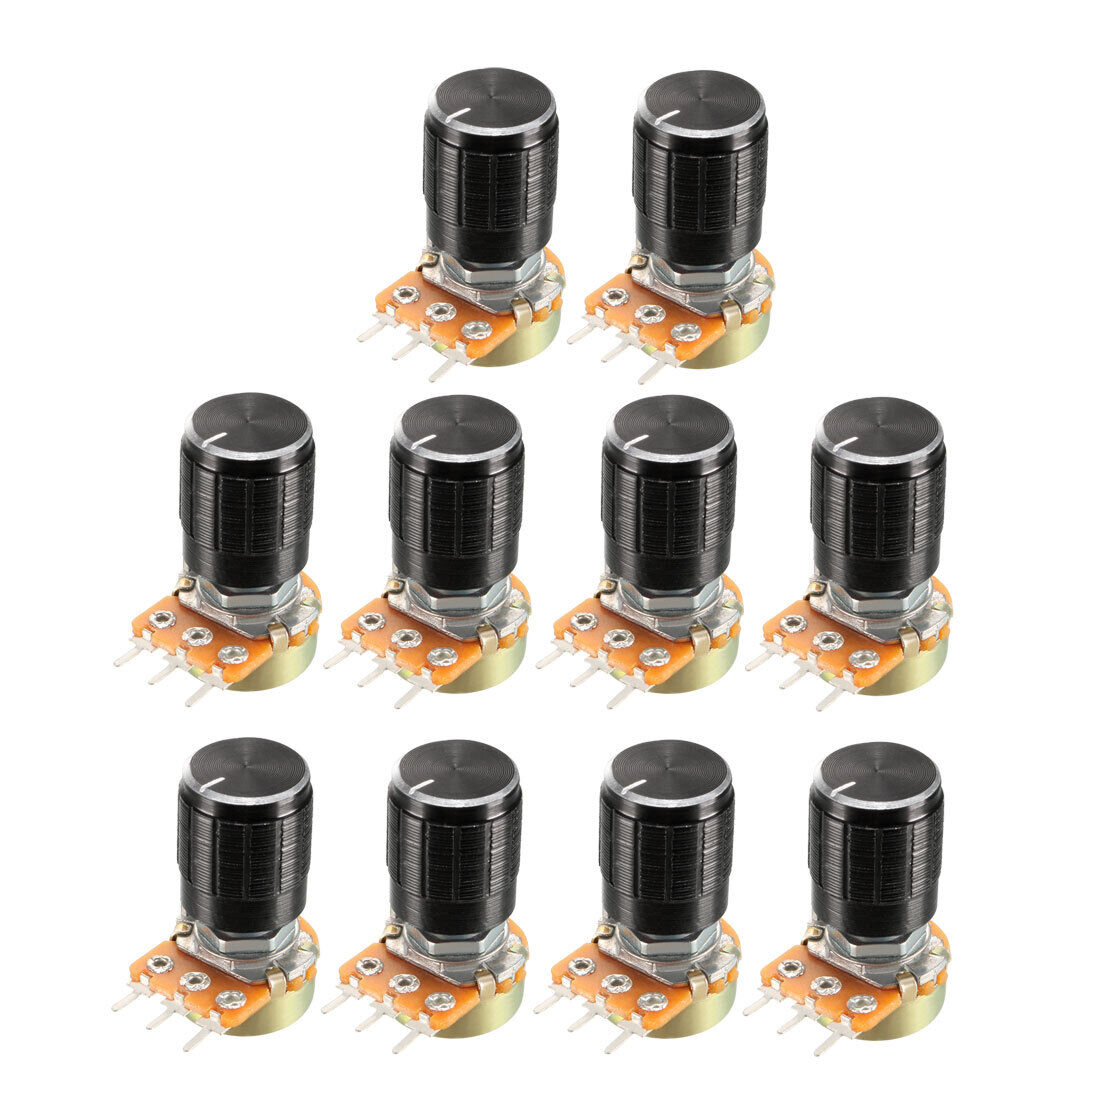 10 Pcs 100K Variable Resistors Rotary Carbon Film Taper Potentiometer with Knobs